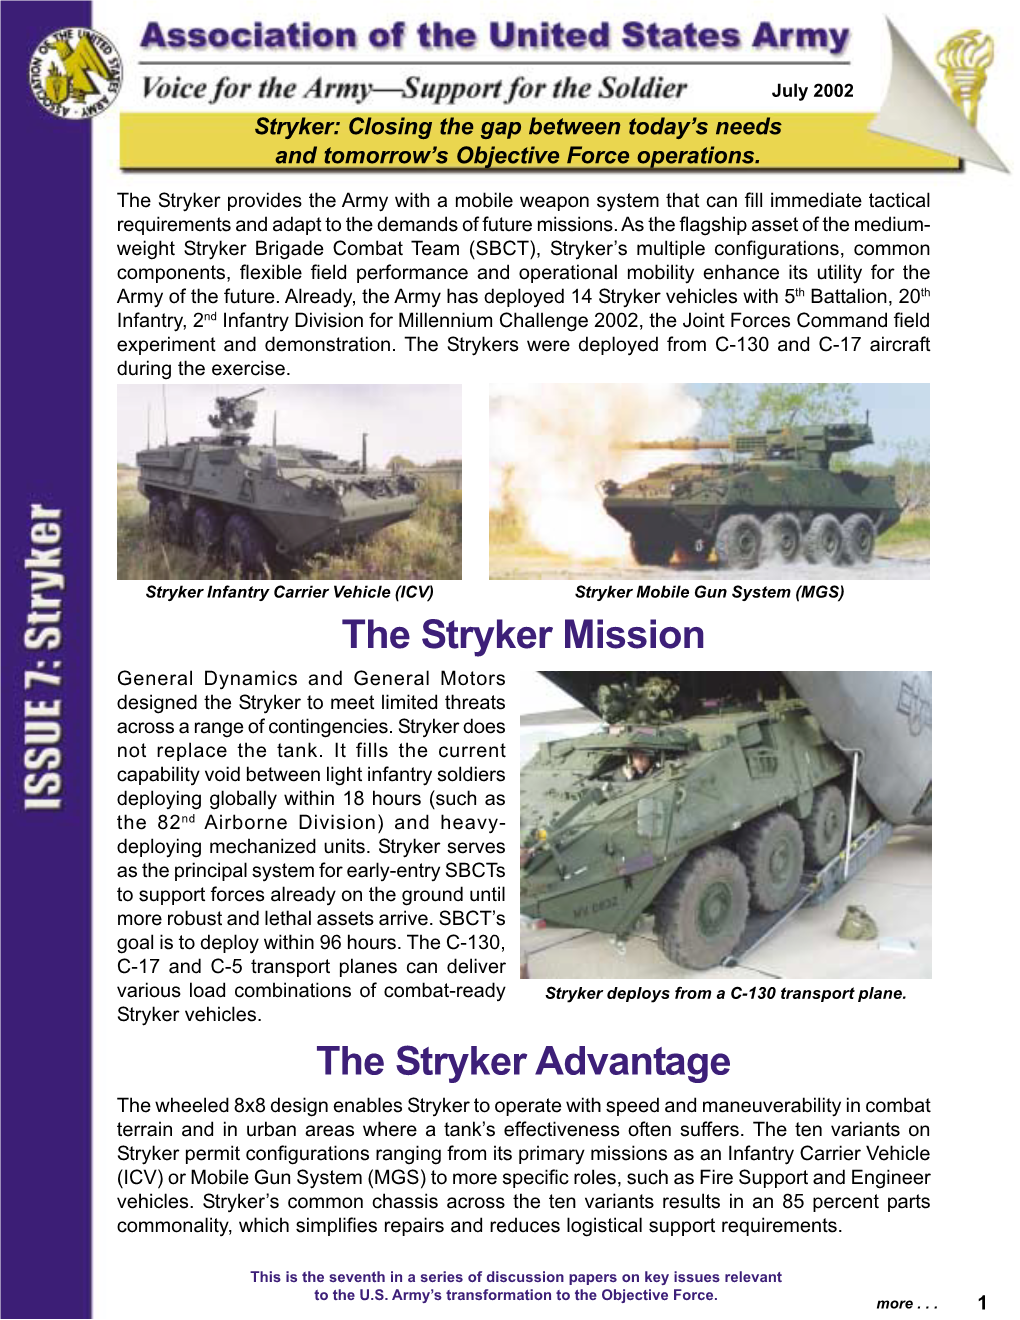 Stryker: Closing the Gap Between Today’S Needs and Tomorrow’S Objective Force Operations